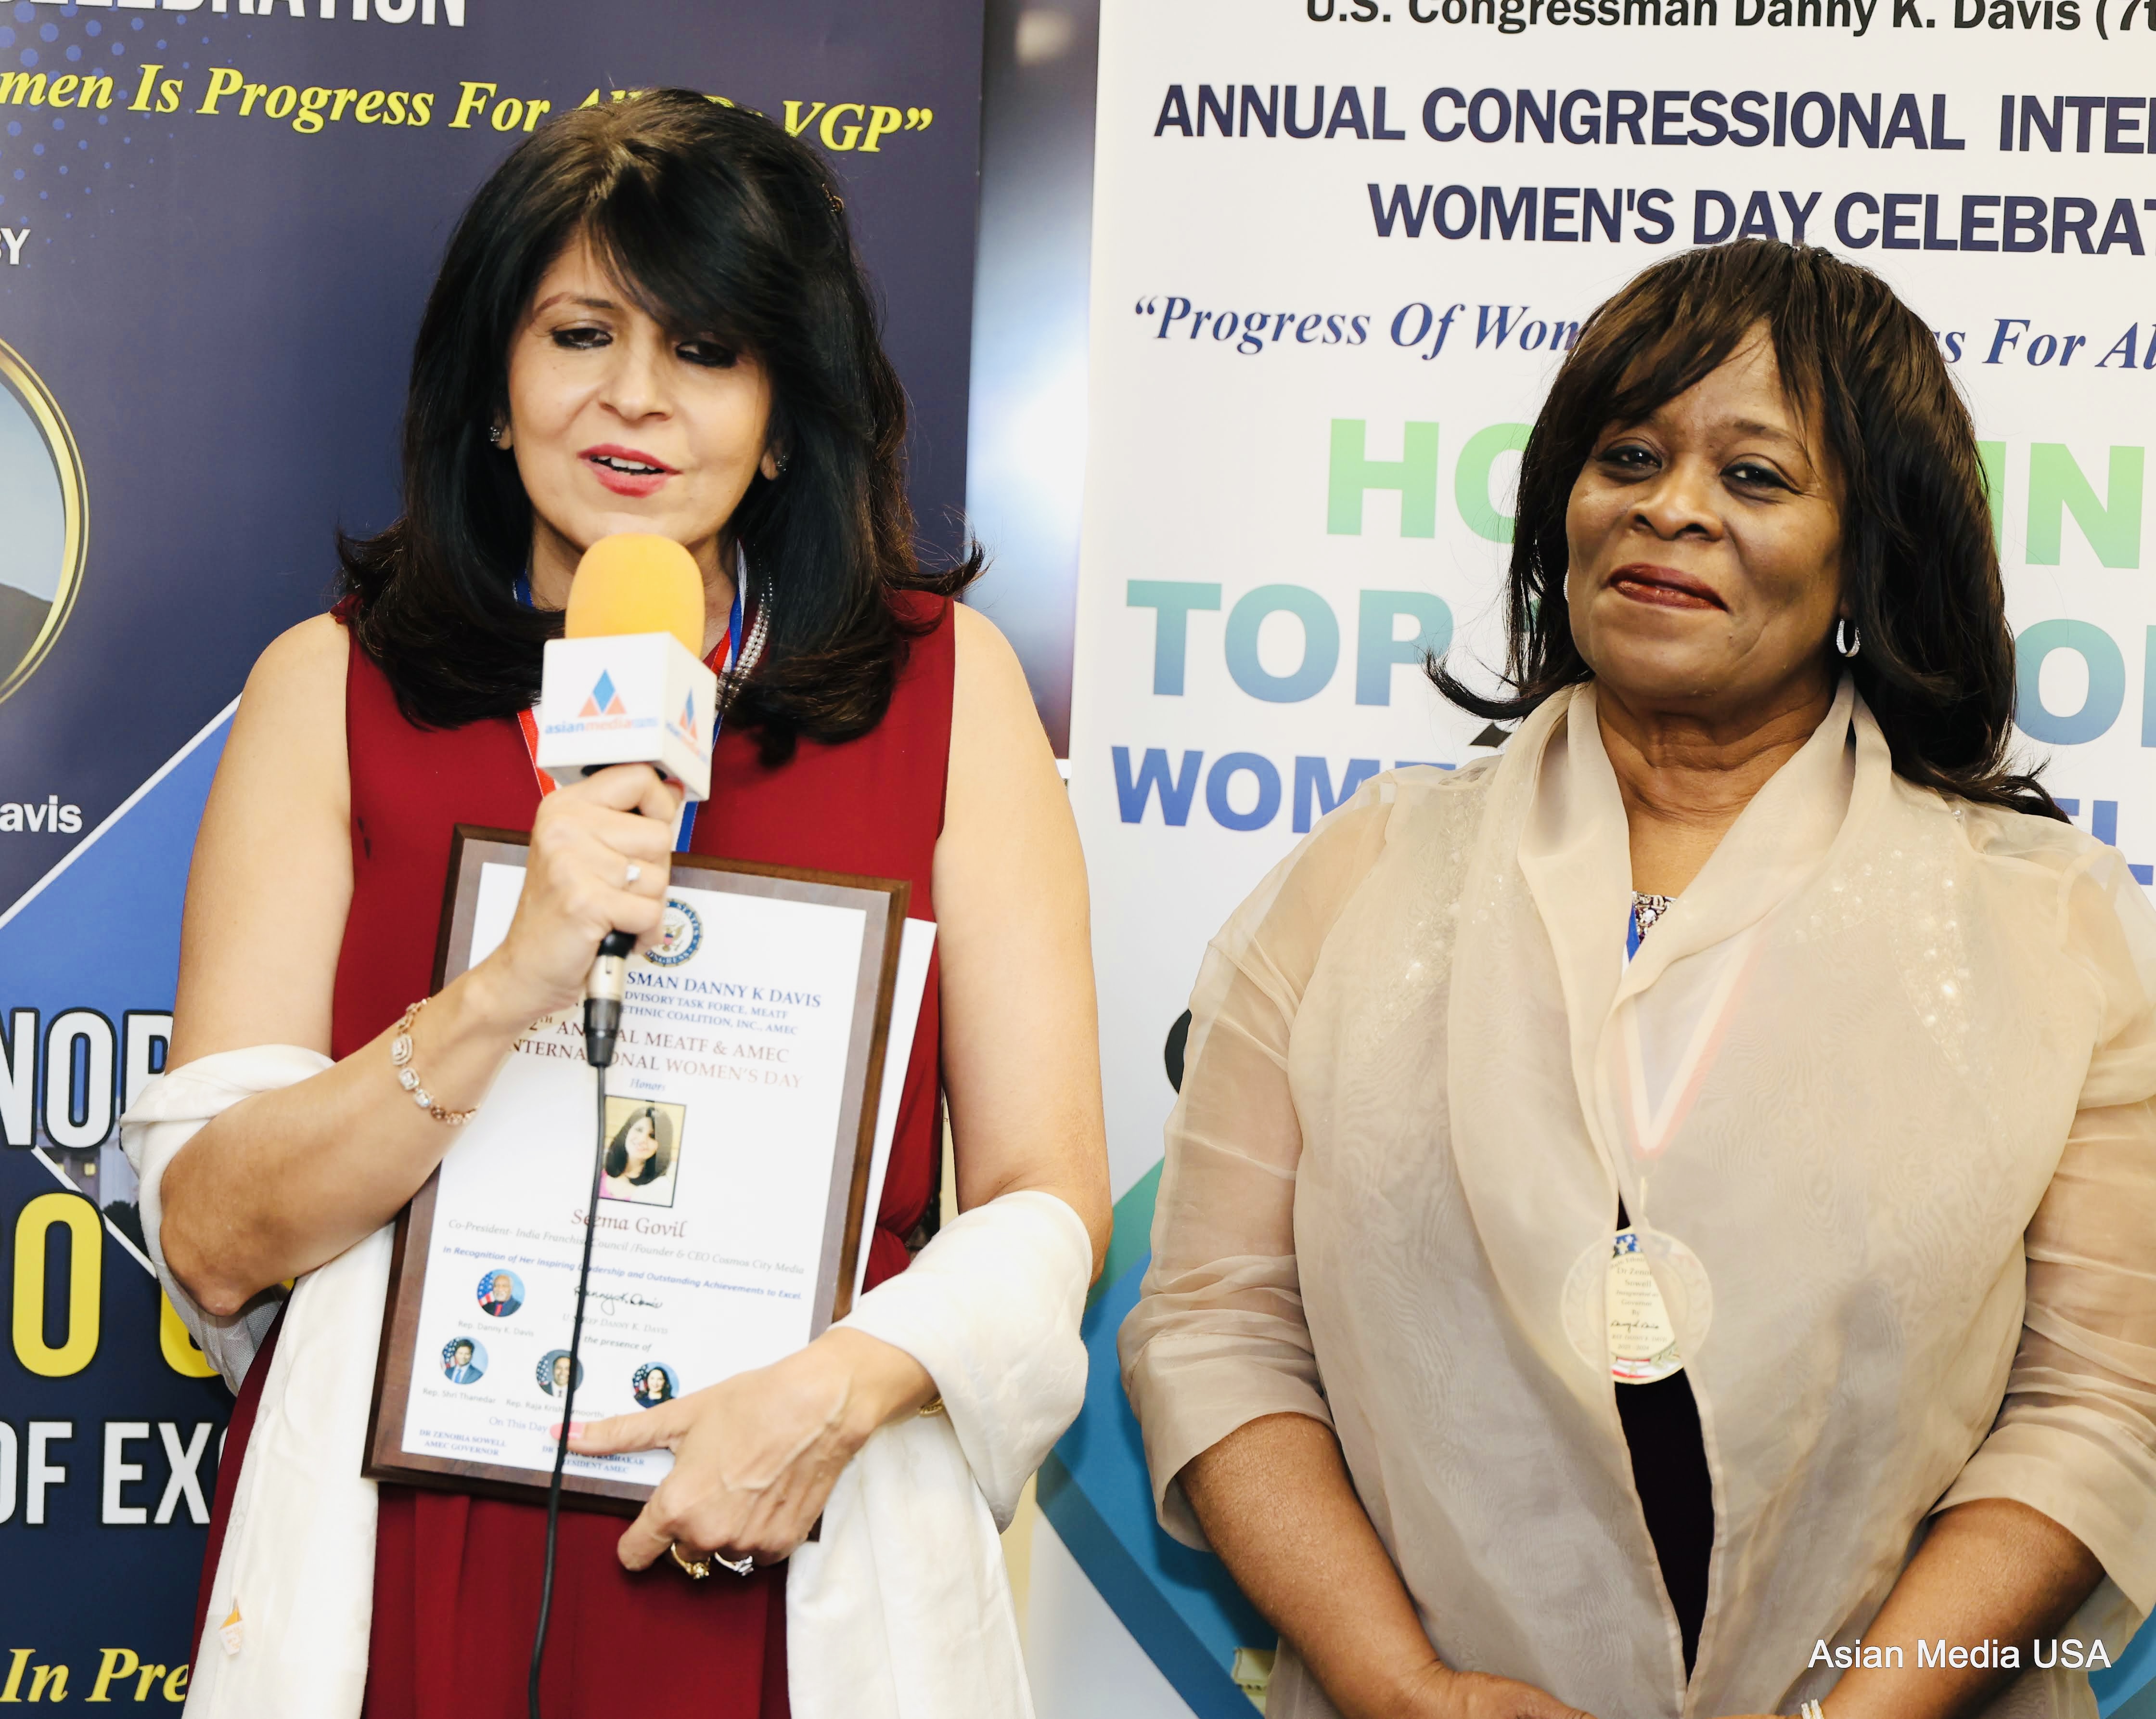 Seema Govil is acknowledged Among the Top 20 Global Women of Excellence